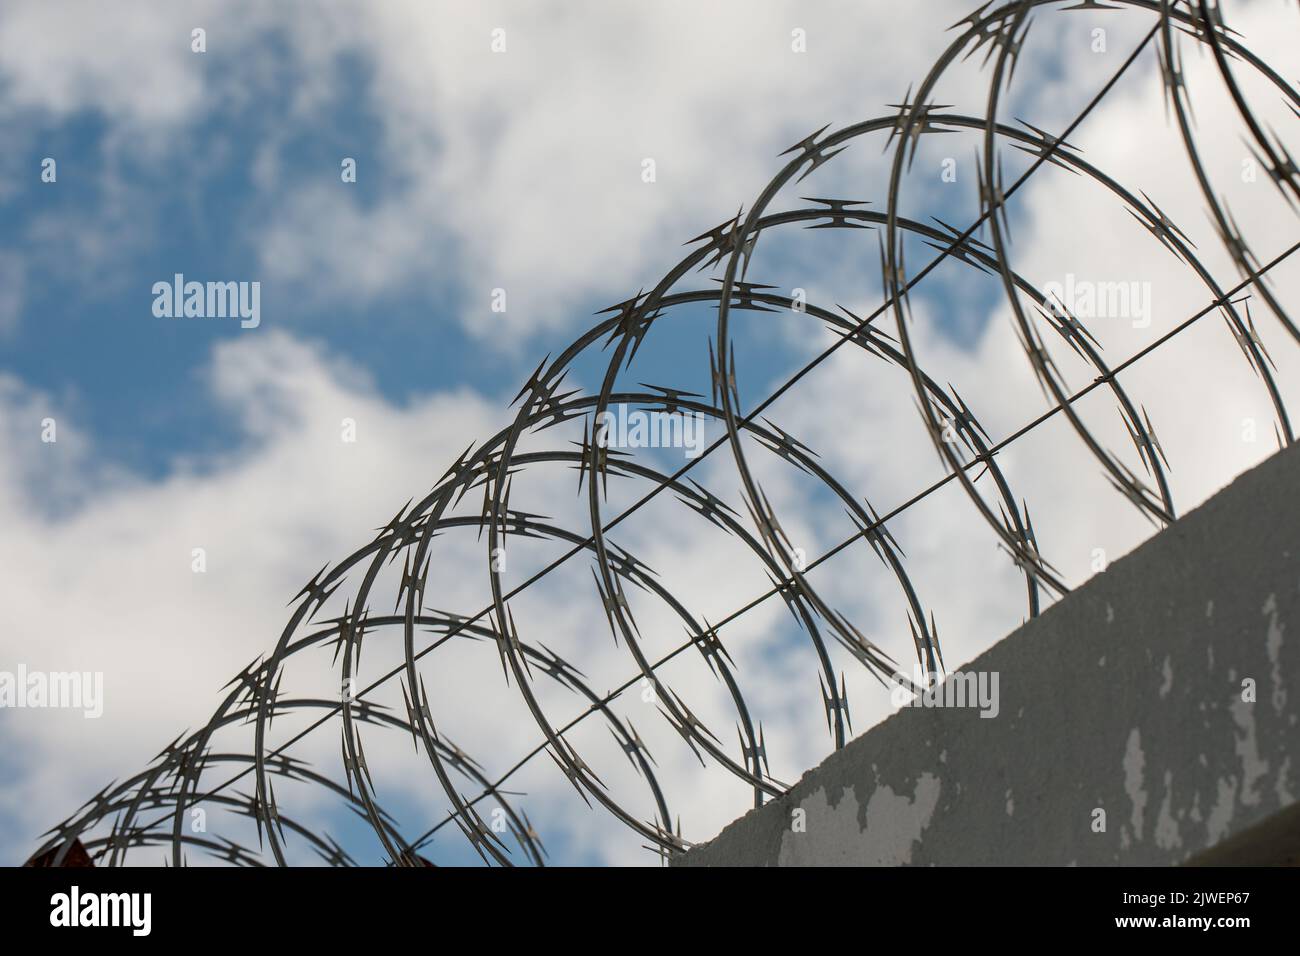 Chain link fence with barbed wire and razor wire. against the blue sky. Stock Photo